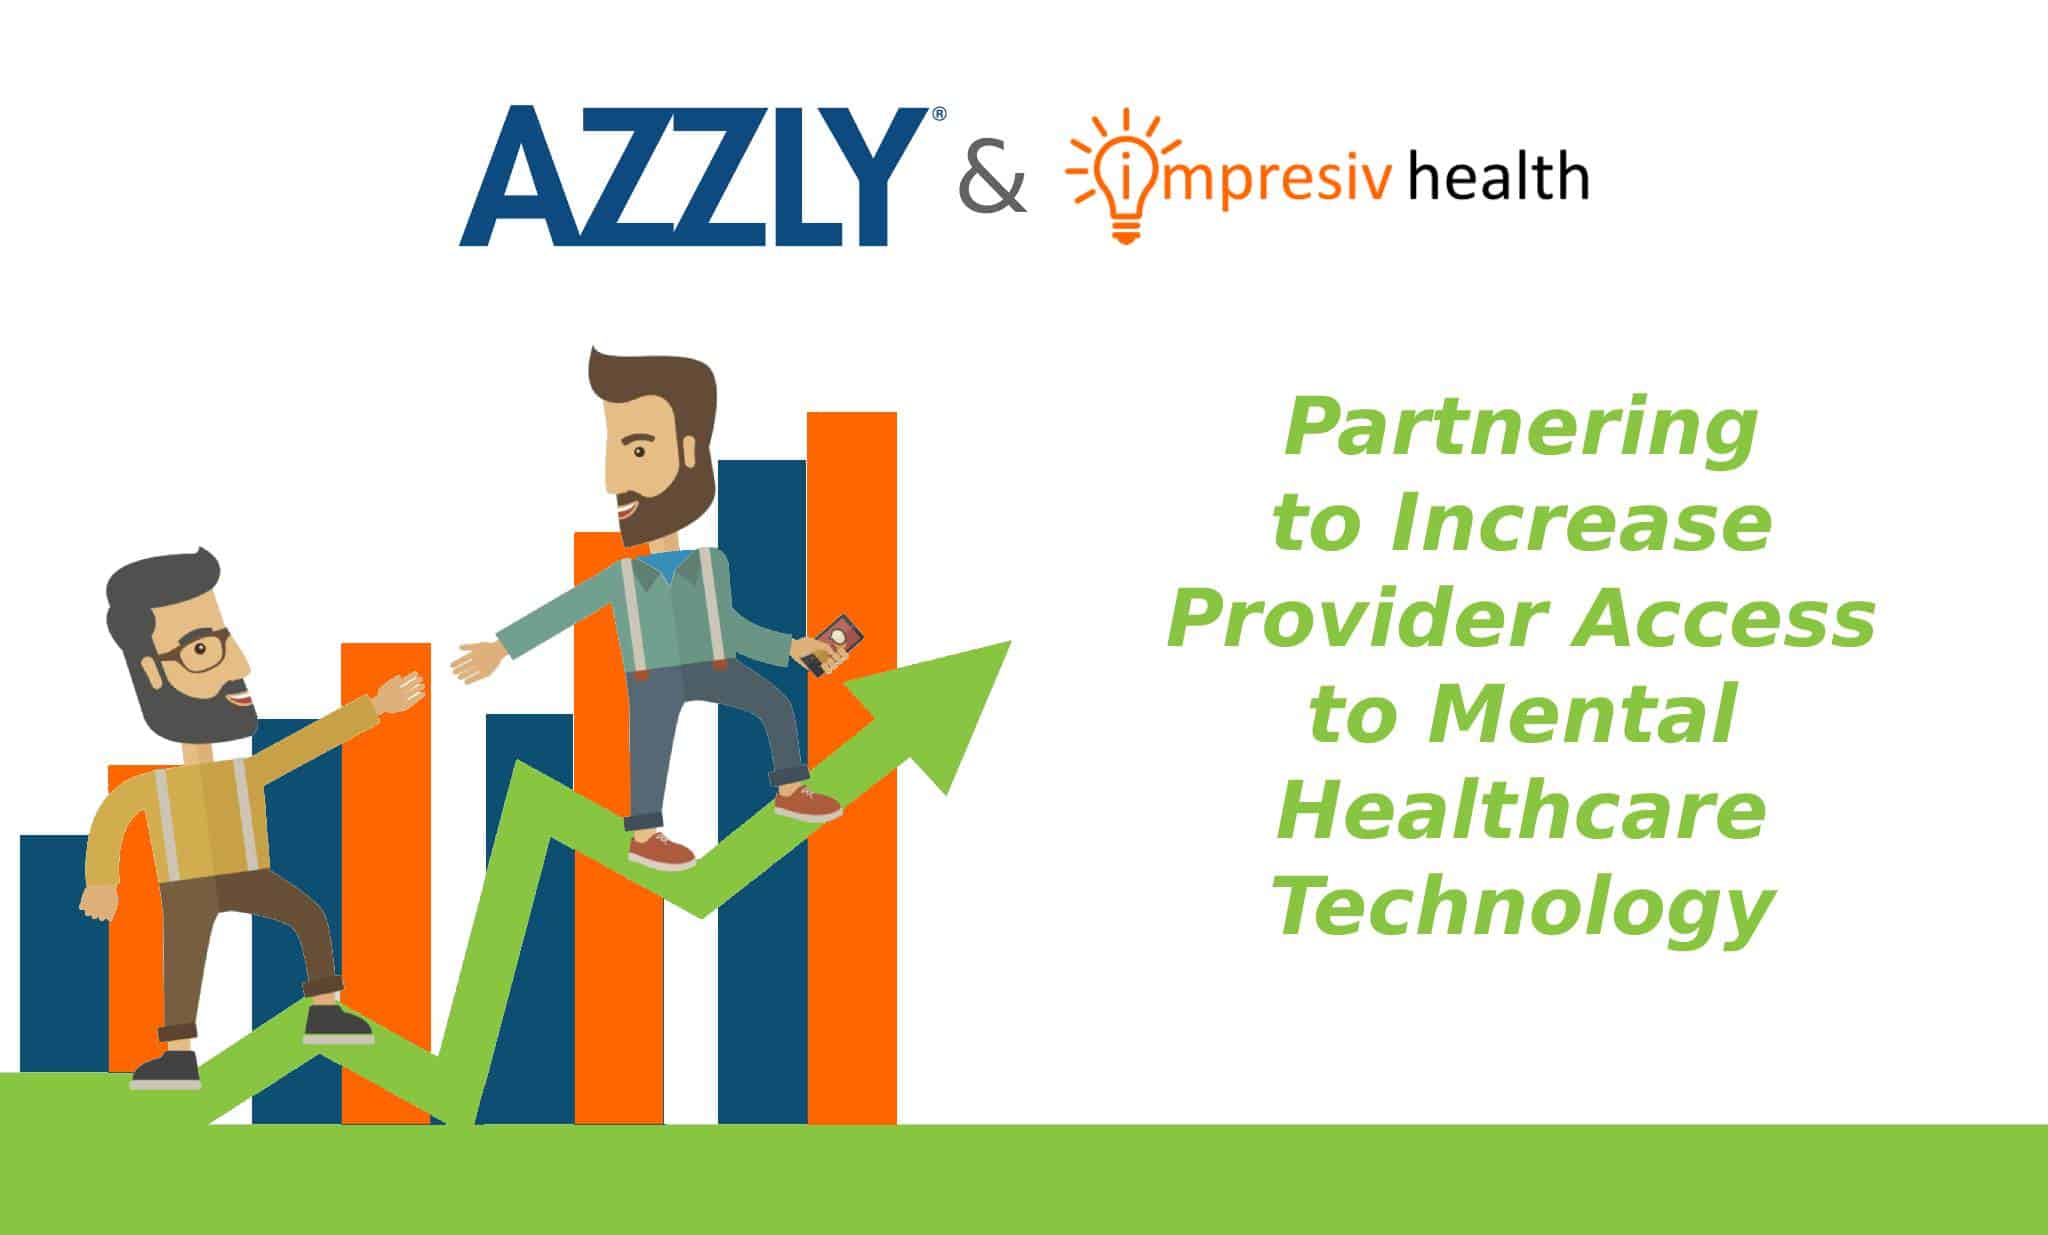 AZZLY® Partners With Impresiv Health® To Increase Provider Access To Mental Healthcare Technology